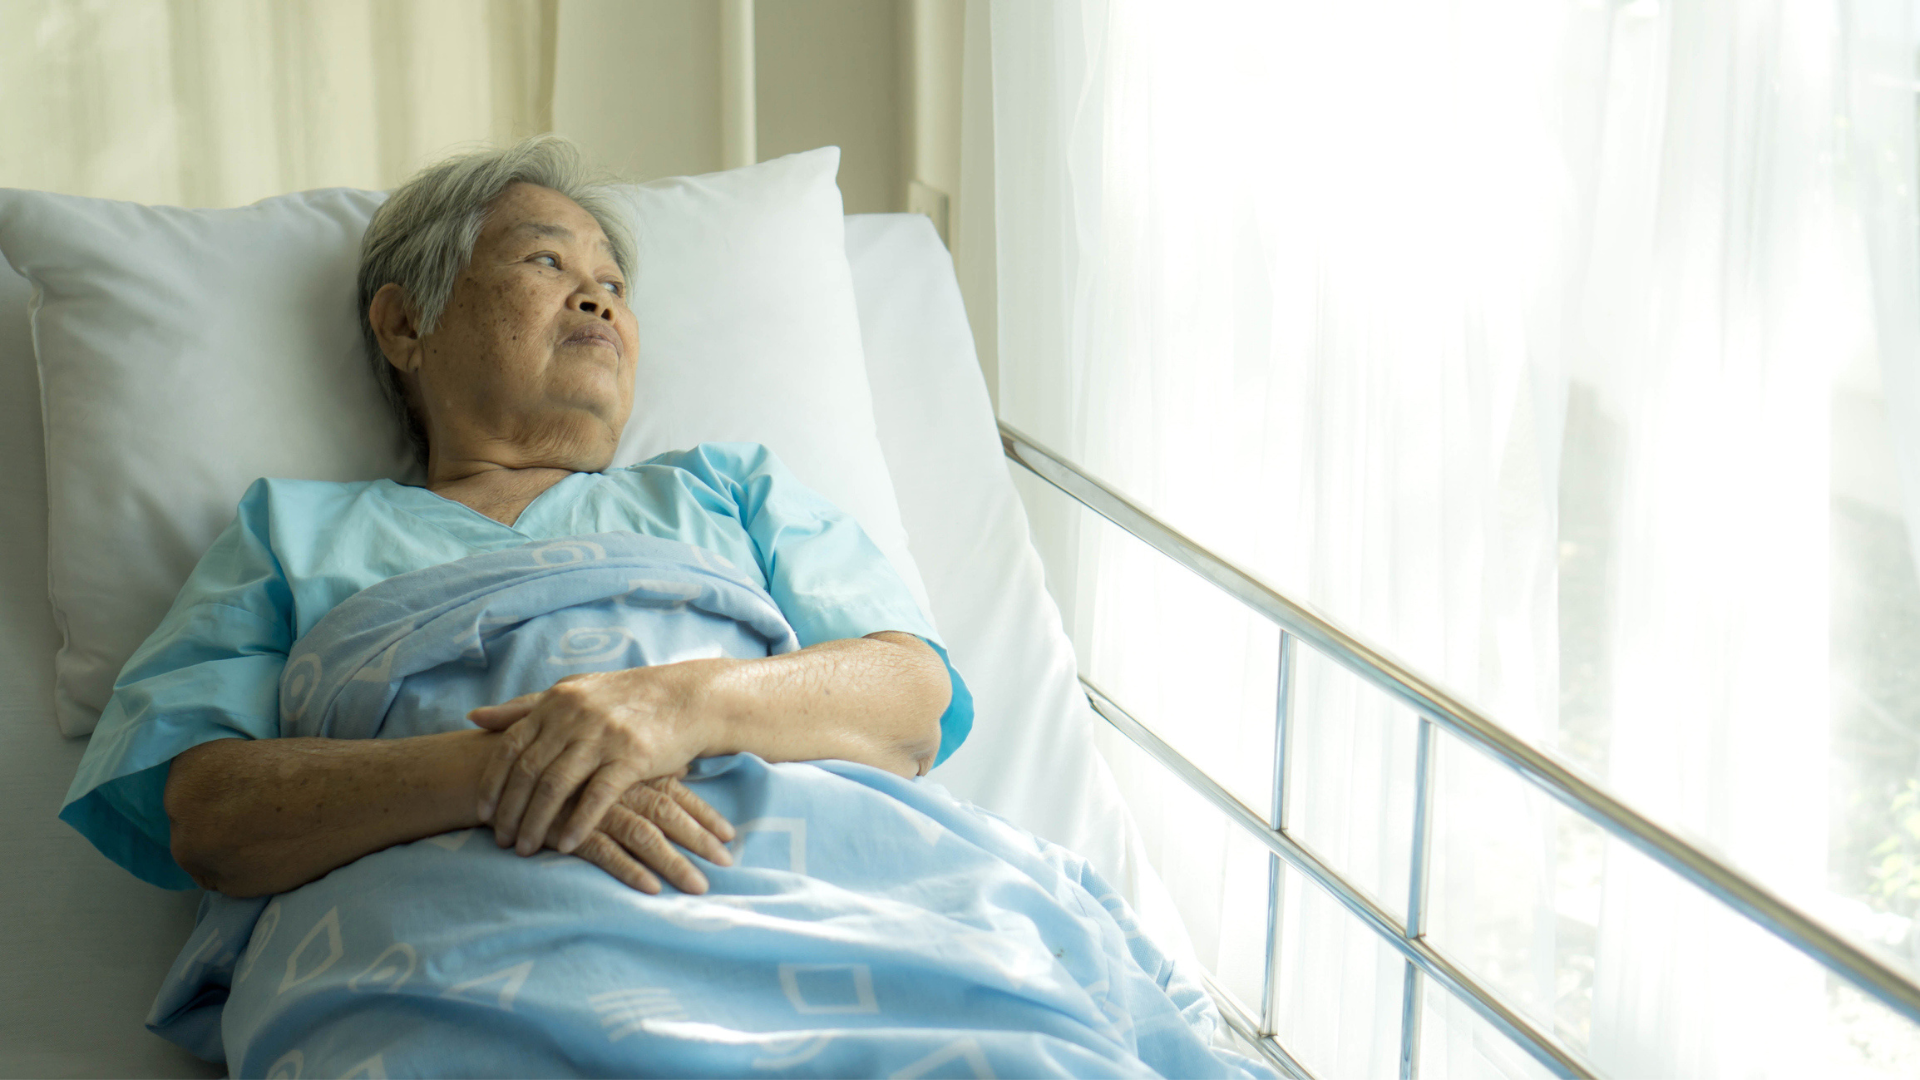 Lonely senior in a hospital bed looking out the window.